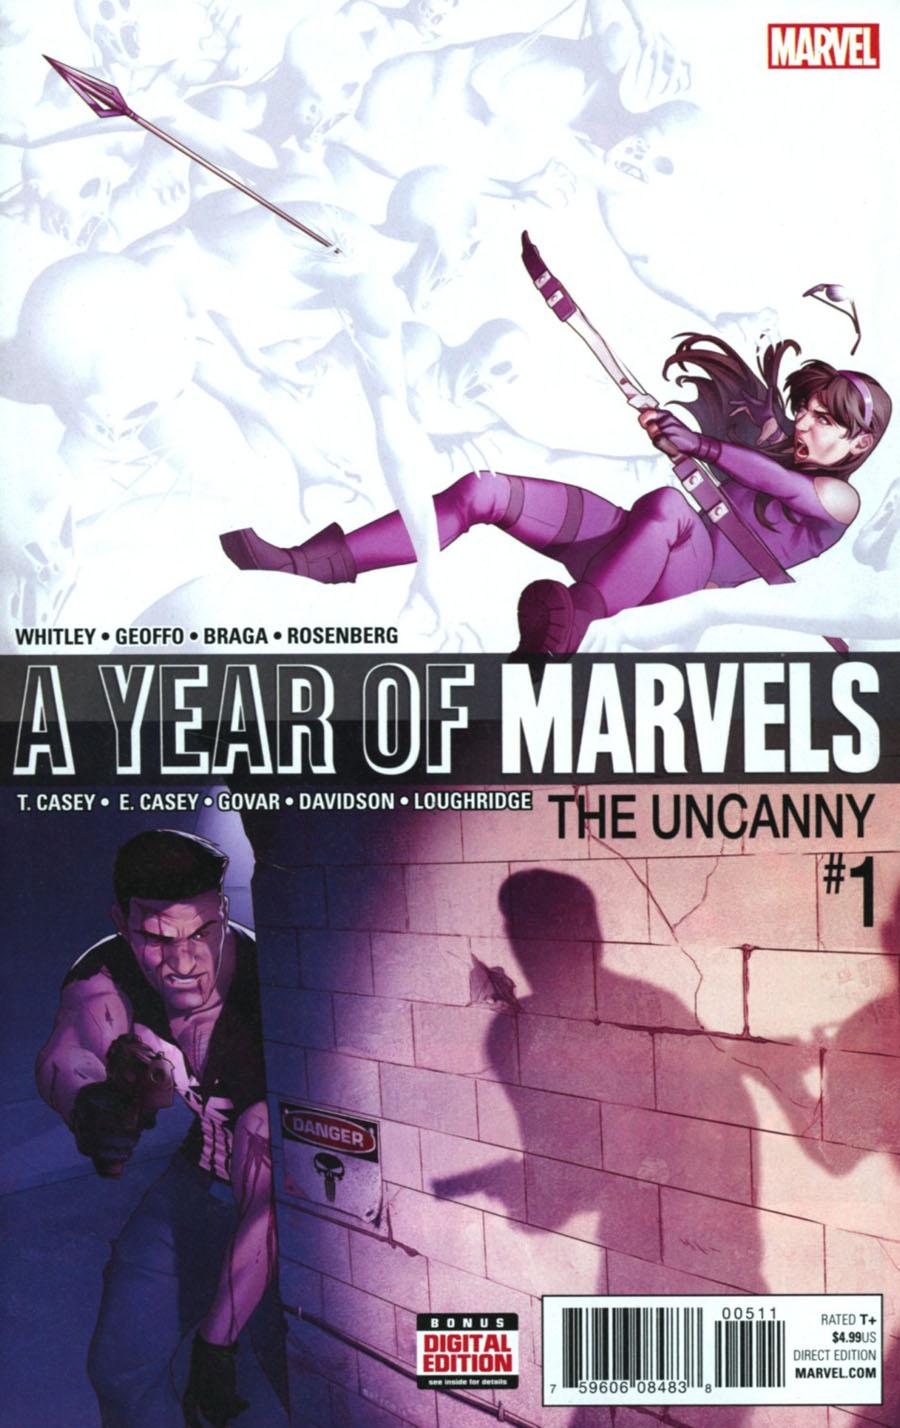 A Year Of Marvels Uncanny Vol. 1 #1